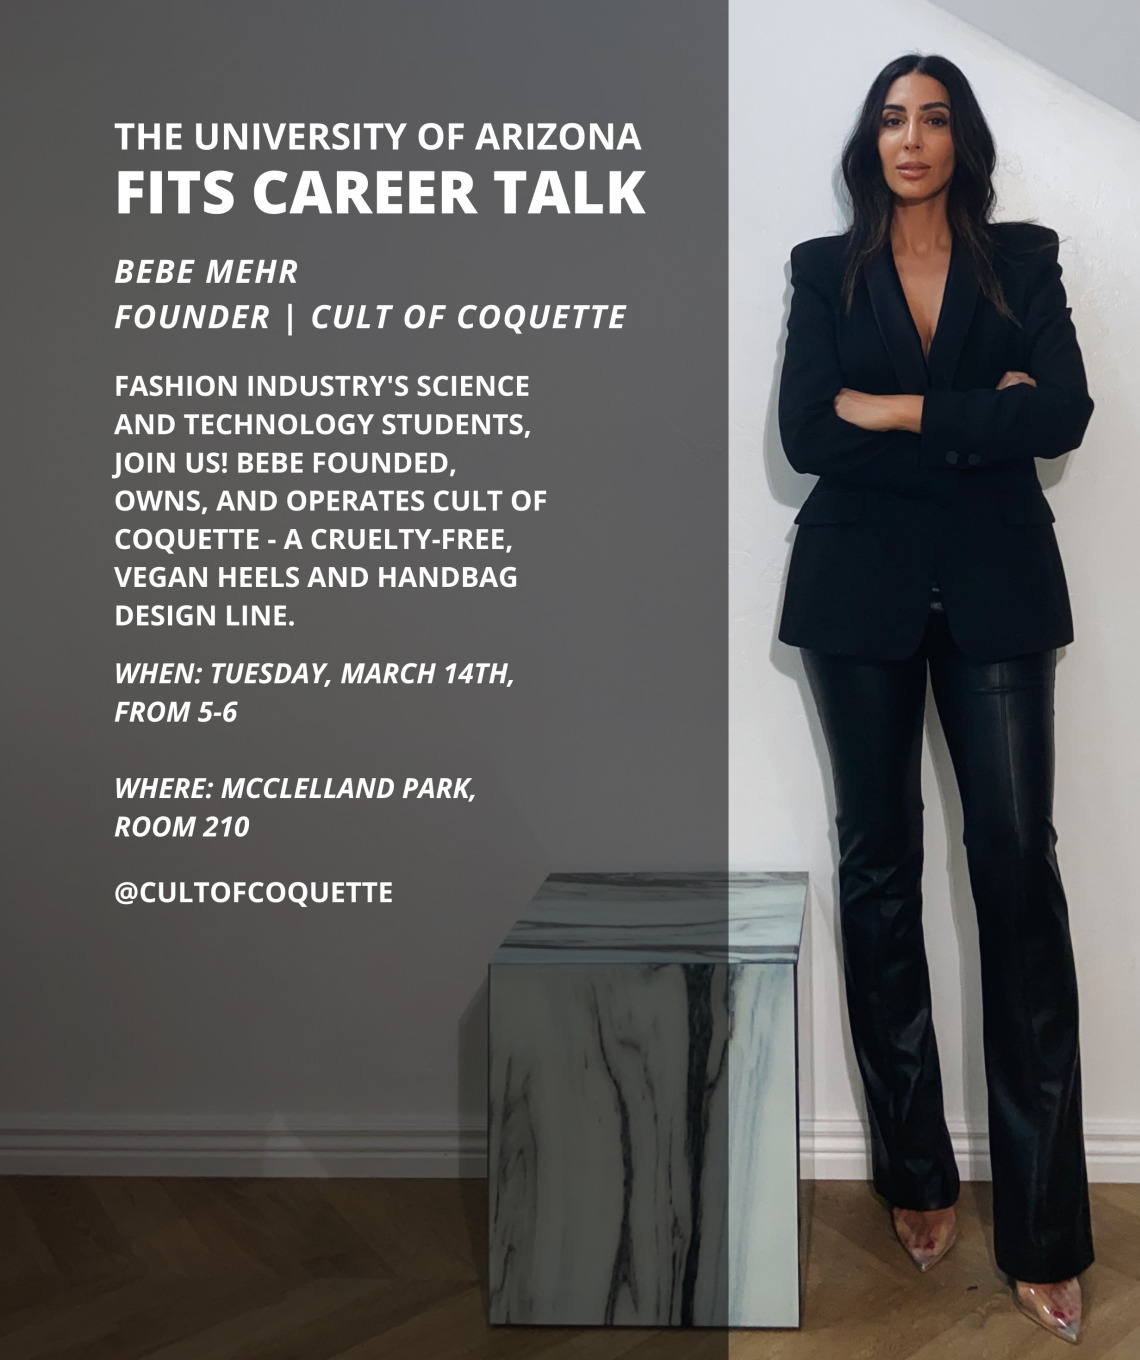 FIT Career Talk with Bebe Mehr information and picture of Bebe Mehr standing